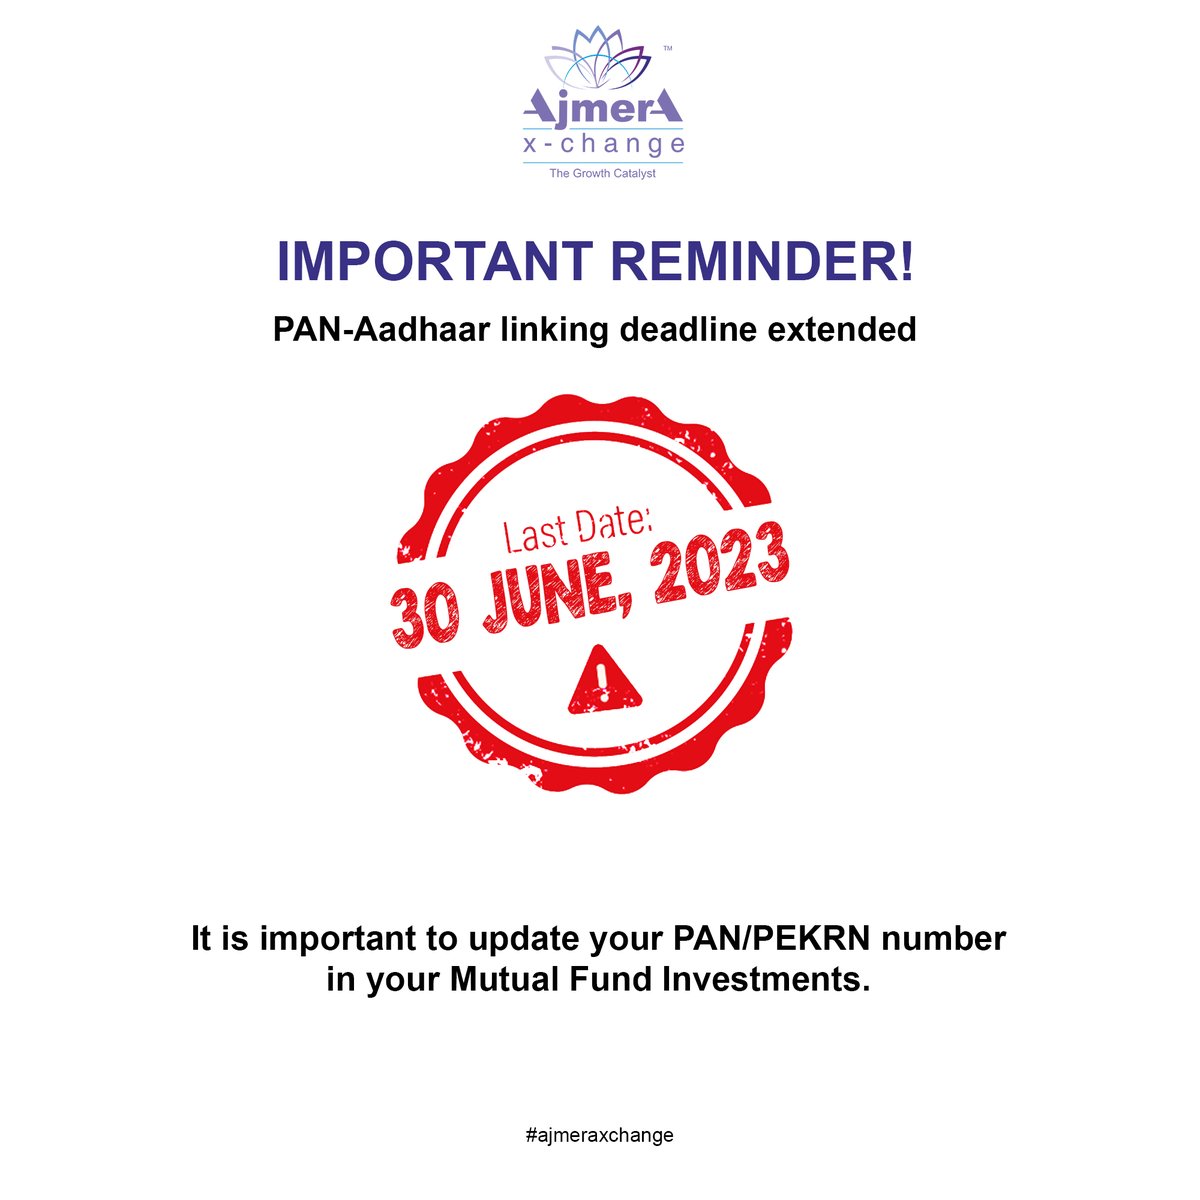 The government extended the deadline for linking PAN cards with Aadhaar to June 30, 2023, from March 31, 2023.📈😎
.
.
.
.

#ajmeraxchange #pancardlink #AadharCardLink #trader #marketplace #MutualFunds #investments #investmenttips #sharemarket #stocks